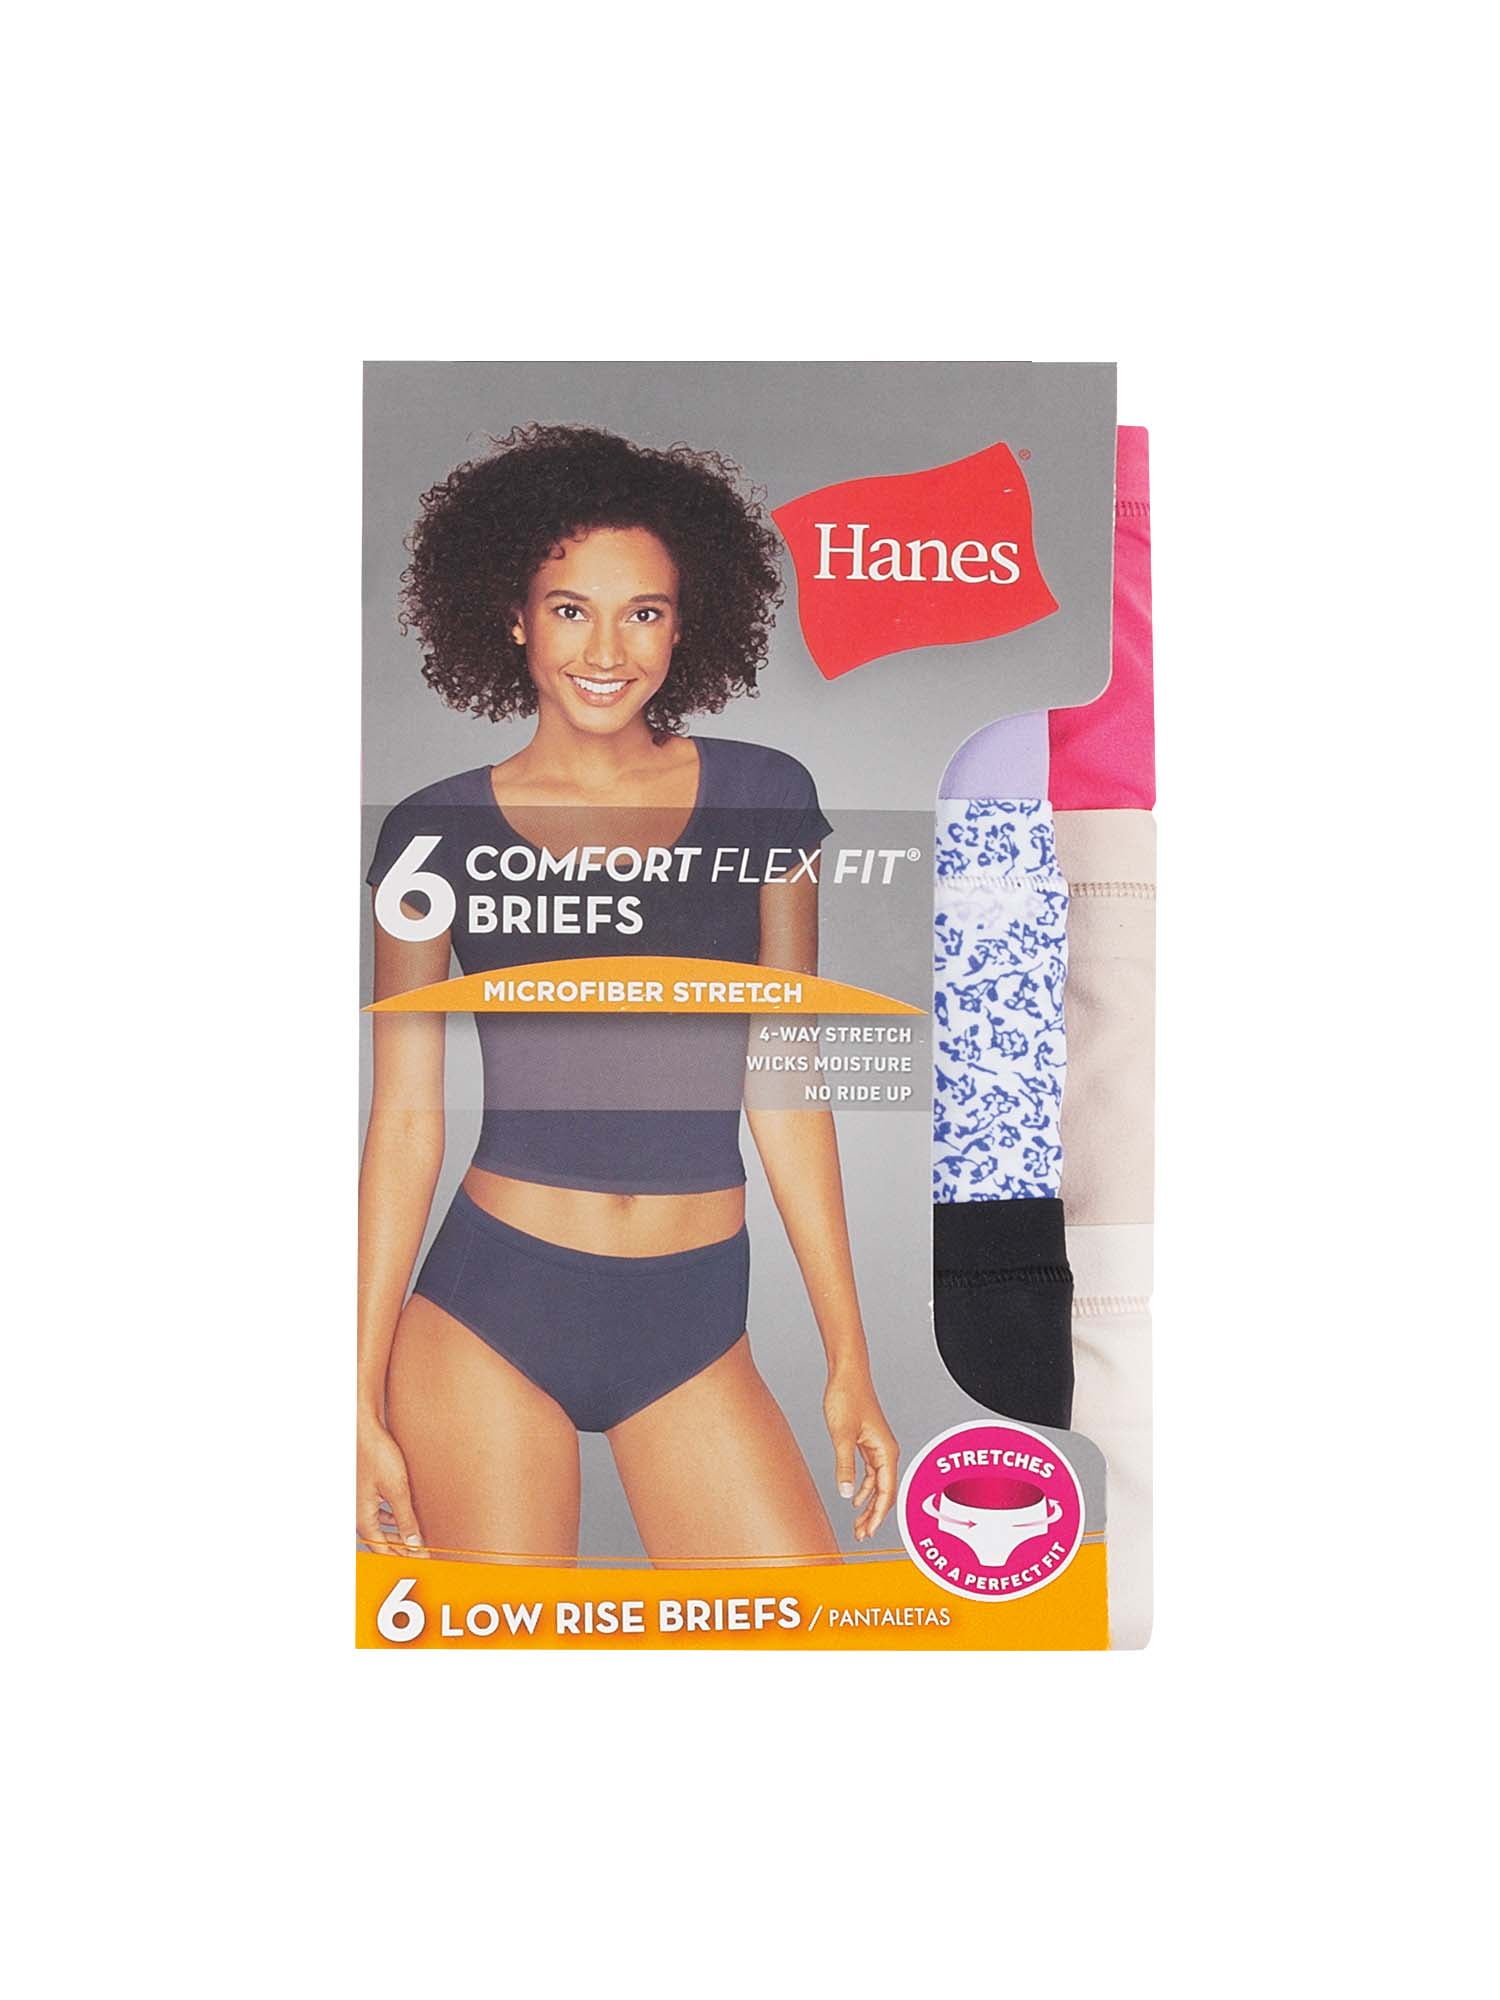 40S3AS - Hanes Women's Body Creations ComfortSoft Stretch Nylon Satin Briefs  3 Pack